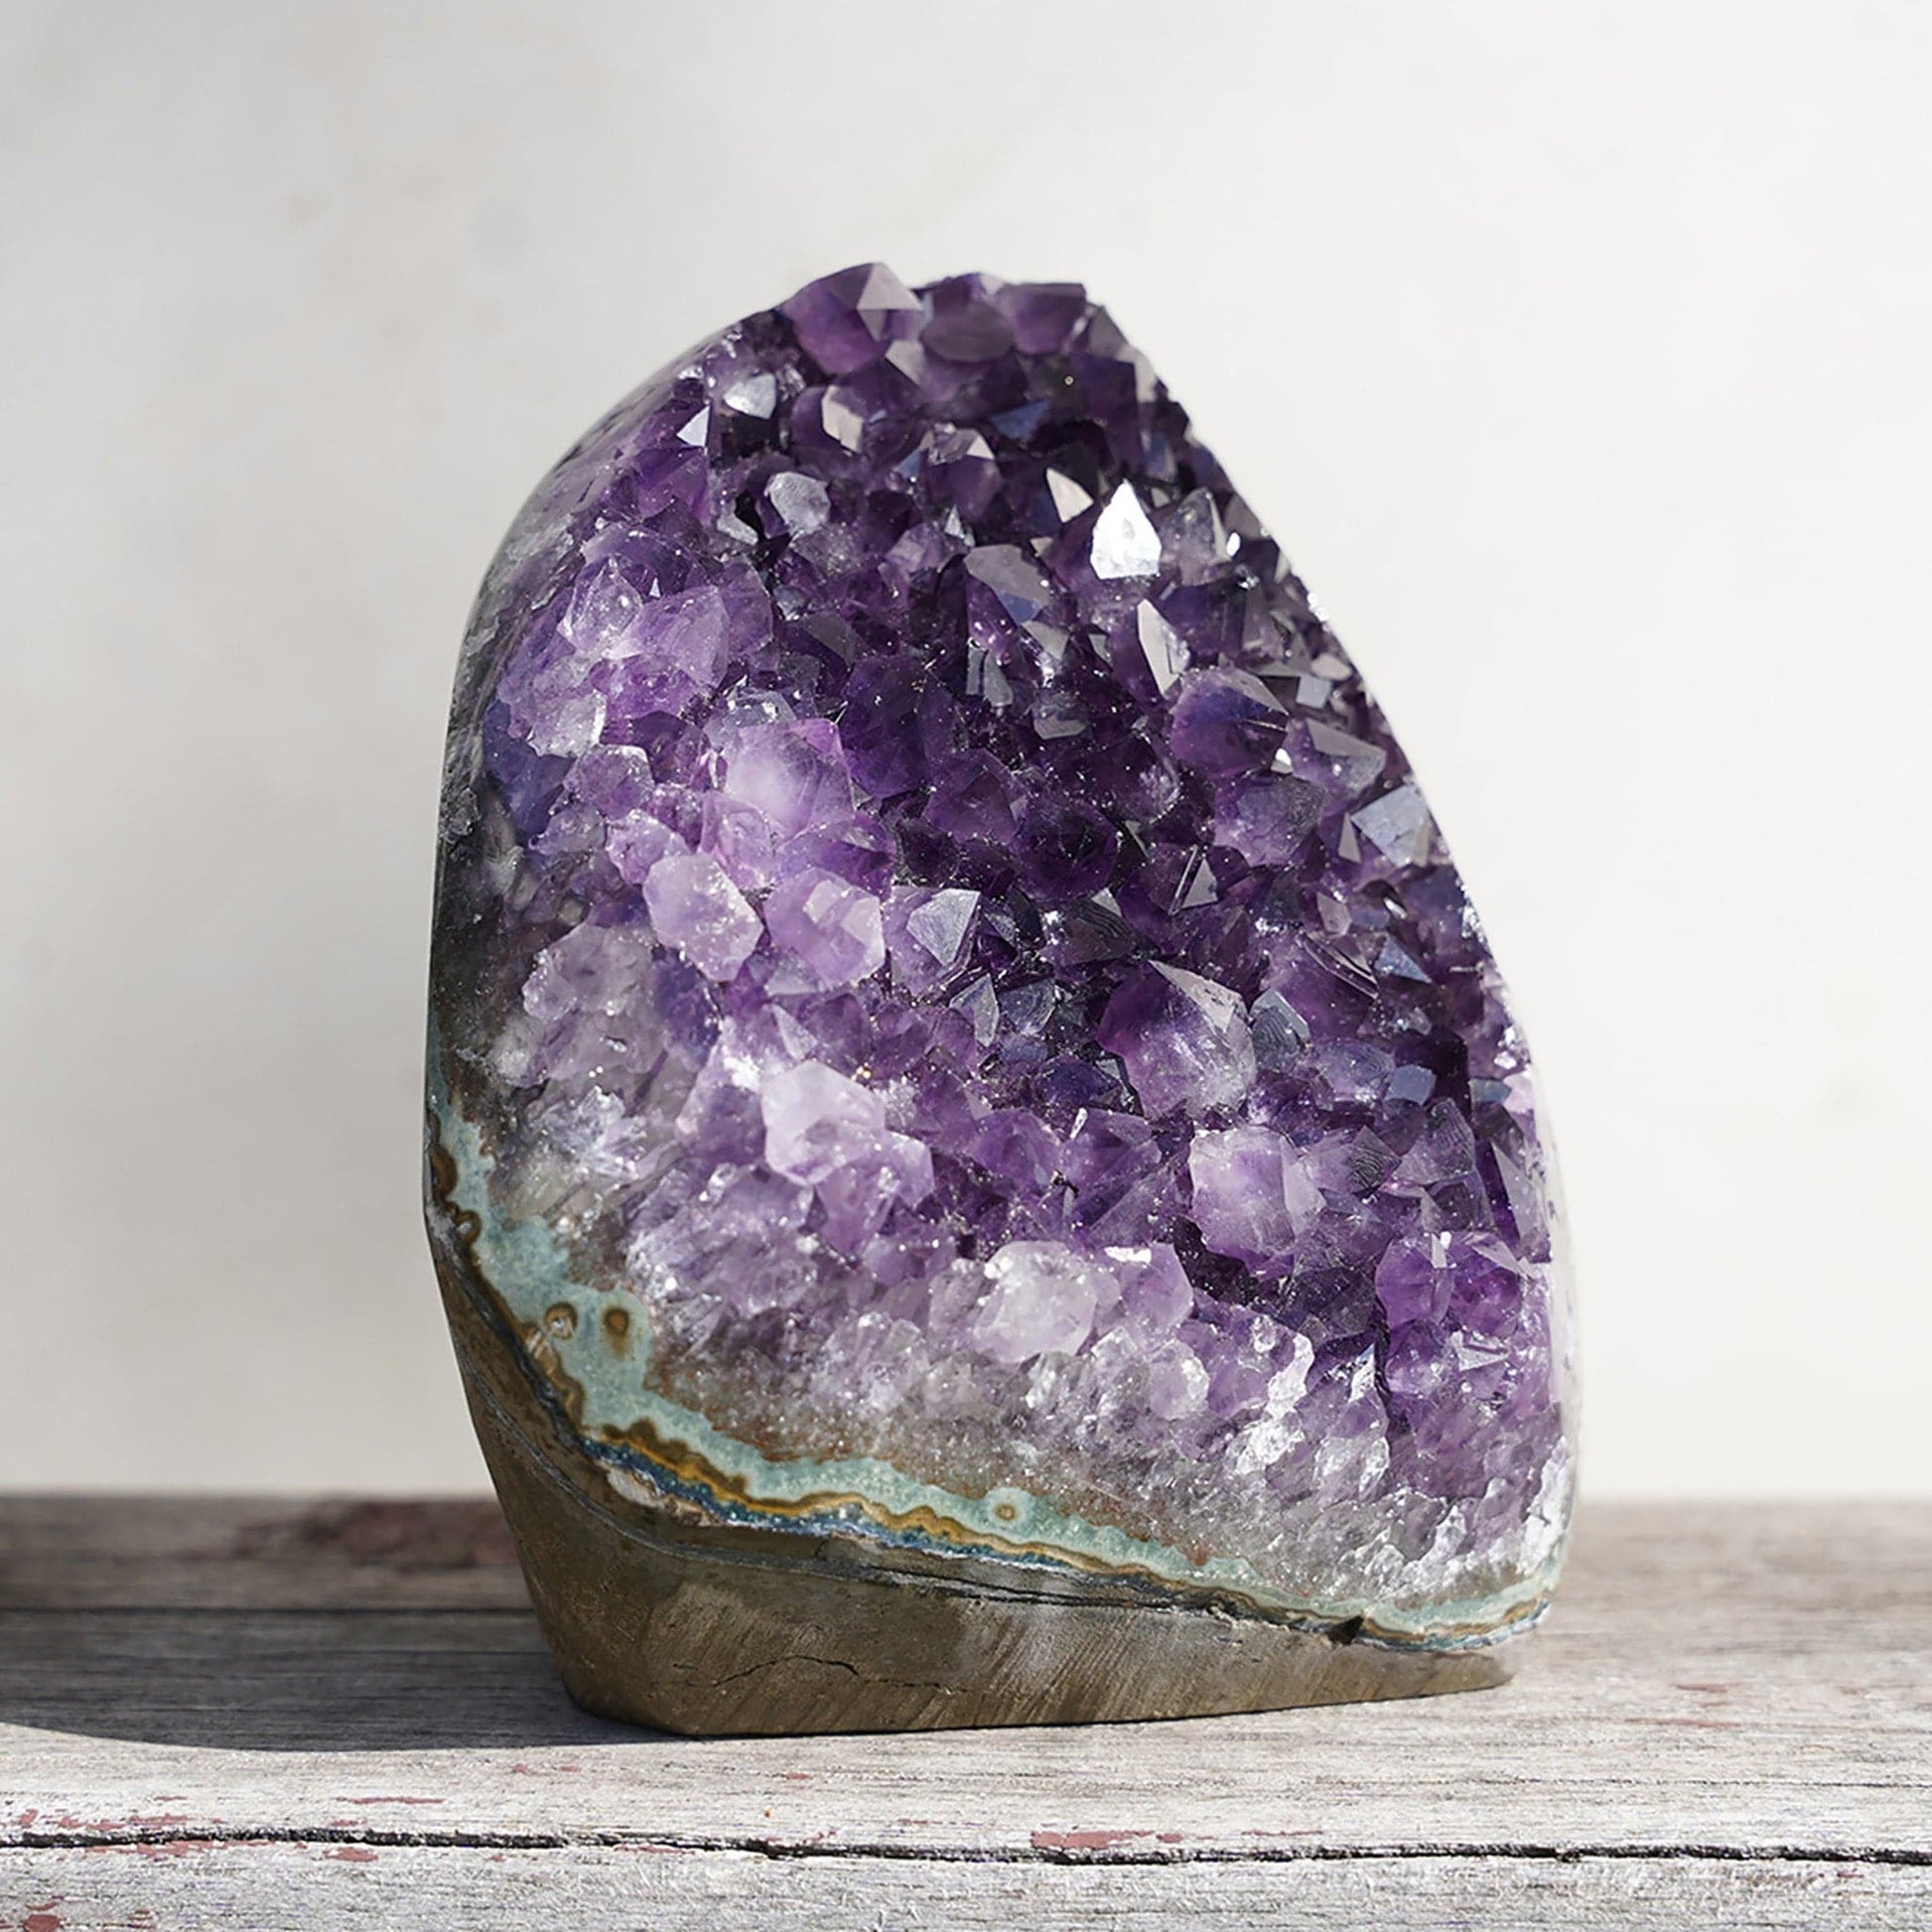 Rare Mineral Amethyst Geode, Crystals, home REGAL decor for sale, Uruguay